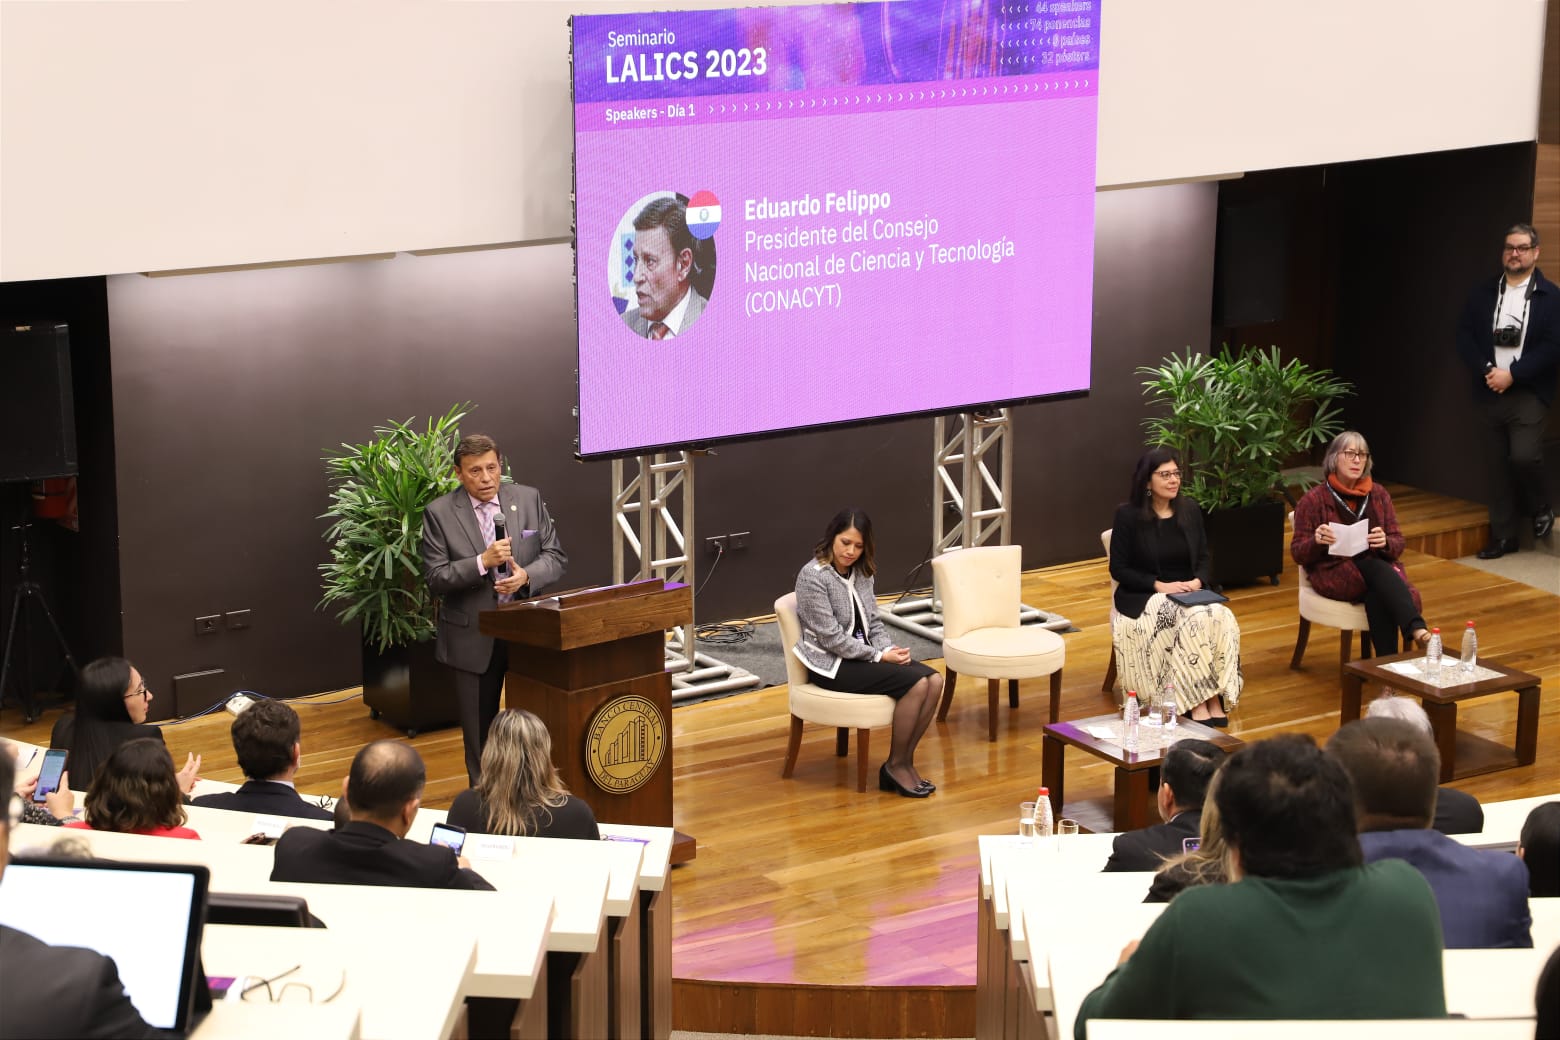 LALICS 2023: the historic event focused on innovation, science and technology ends